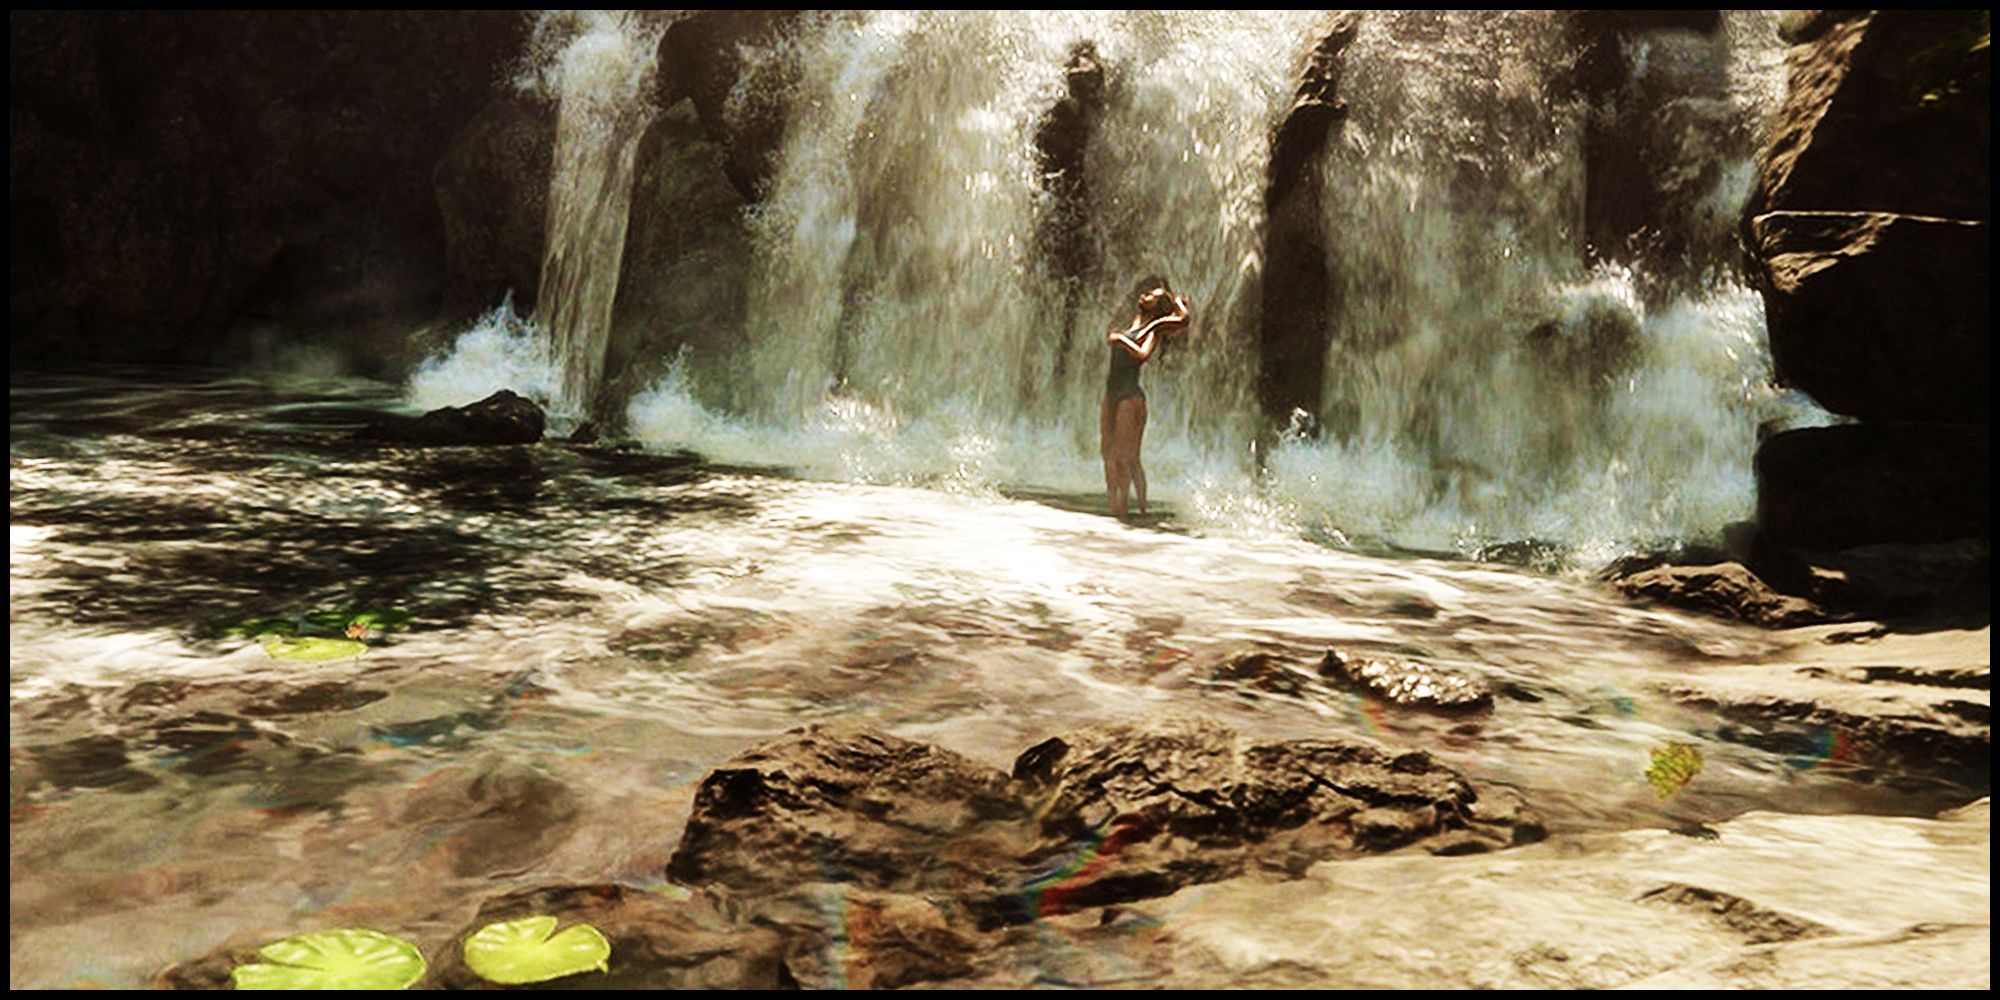 Screenshot of the Sons of Forest Virginia waterfall